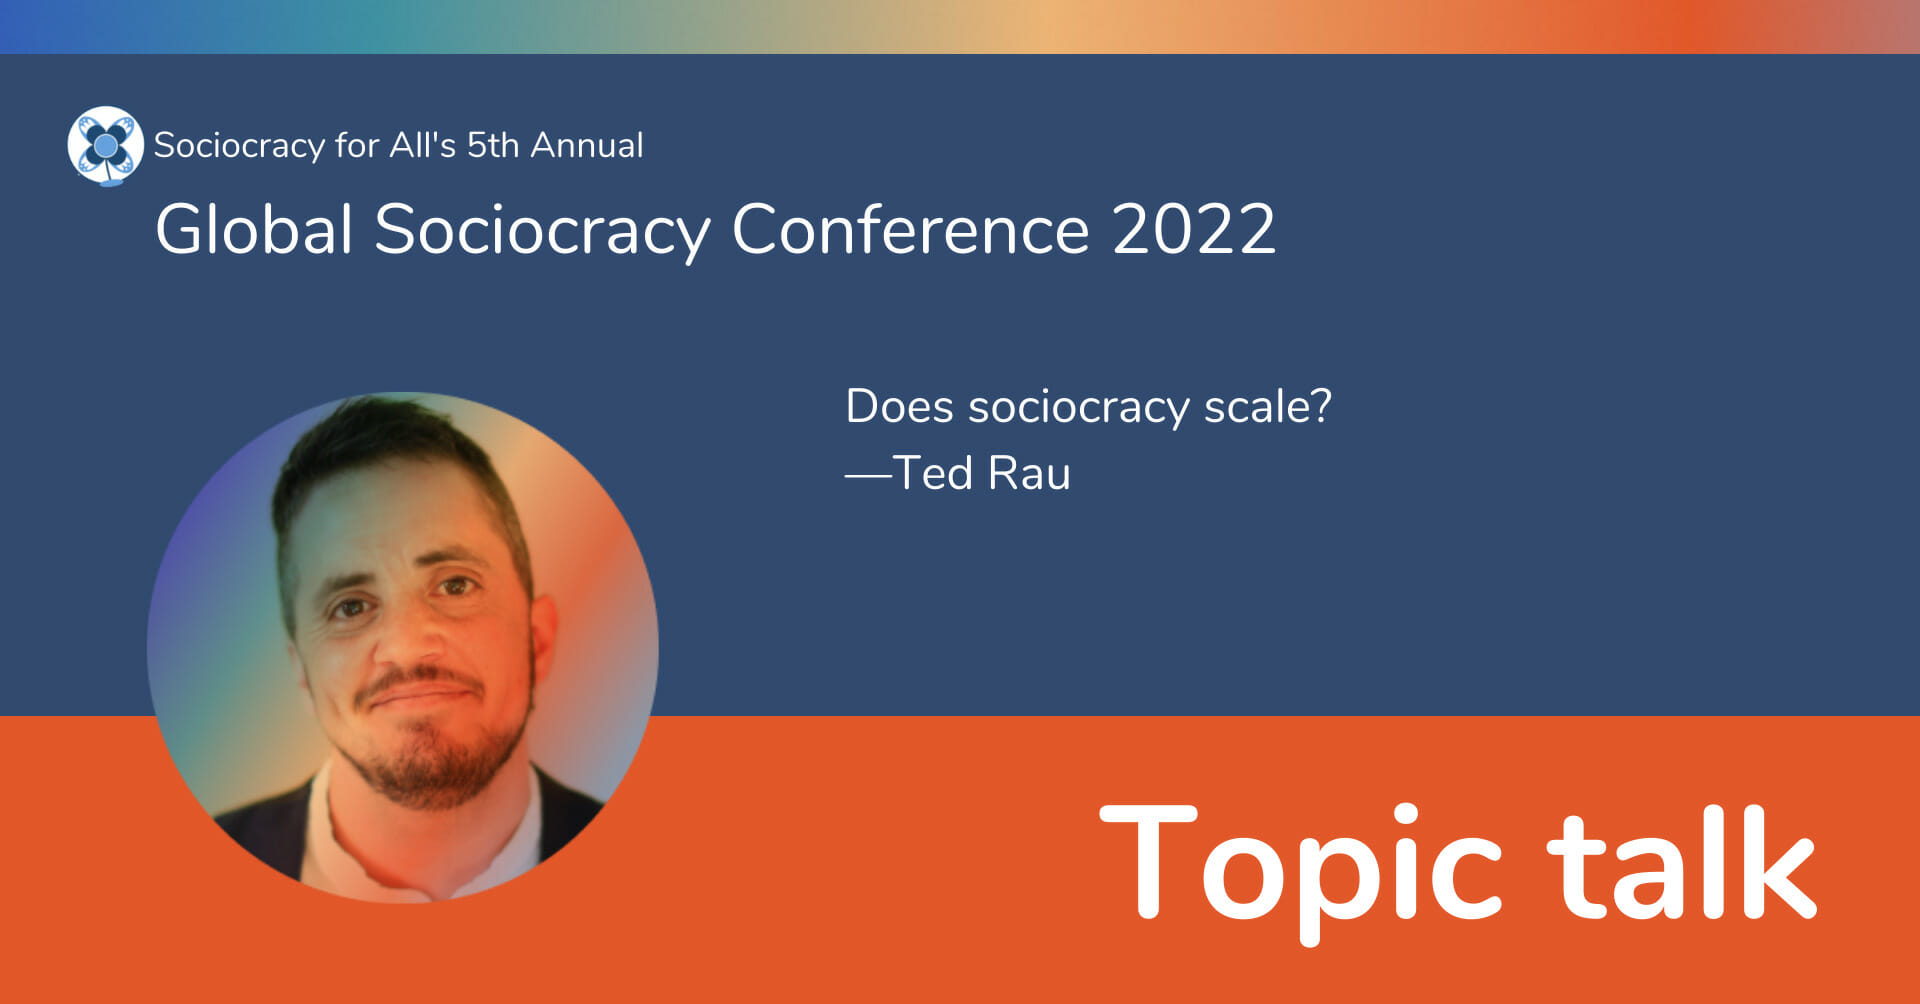 Does sociocracy scale? (And if so, how?) —Ted Rau